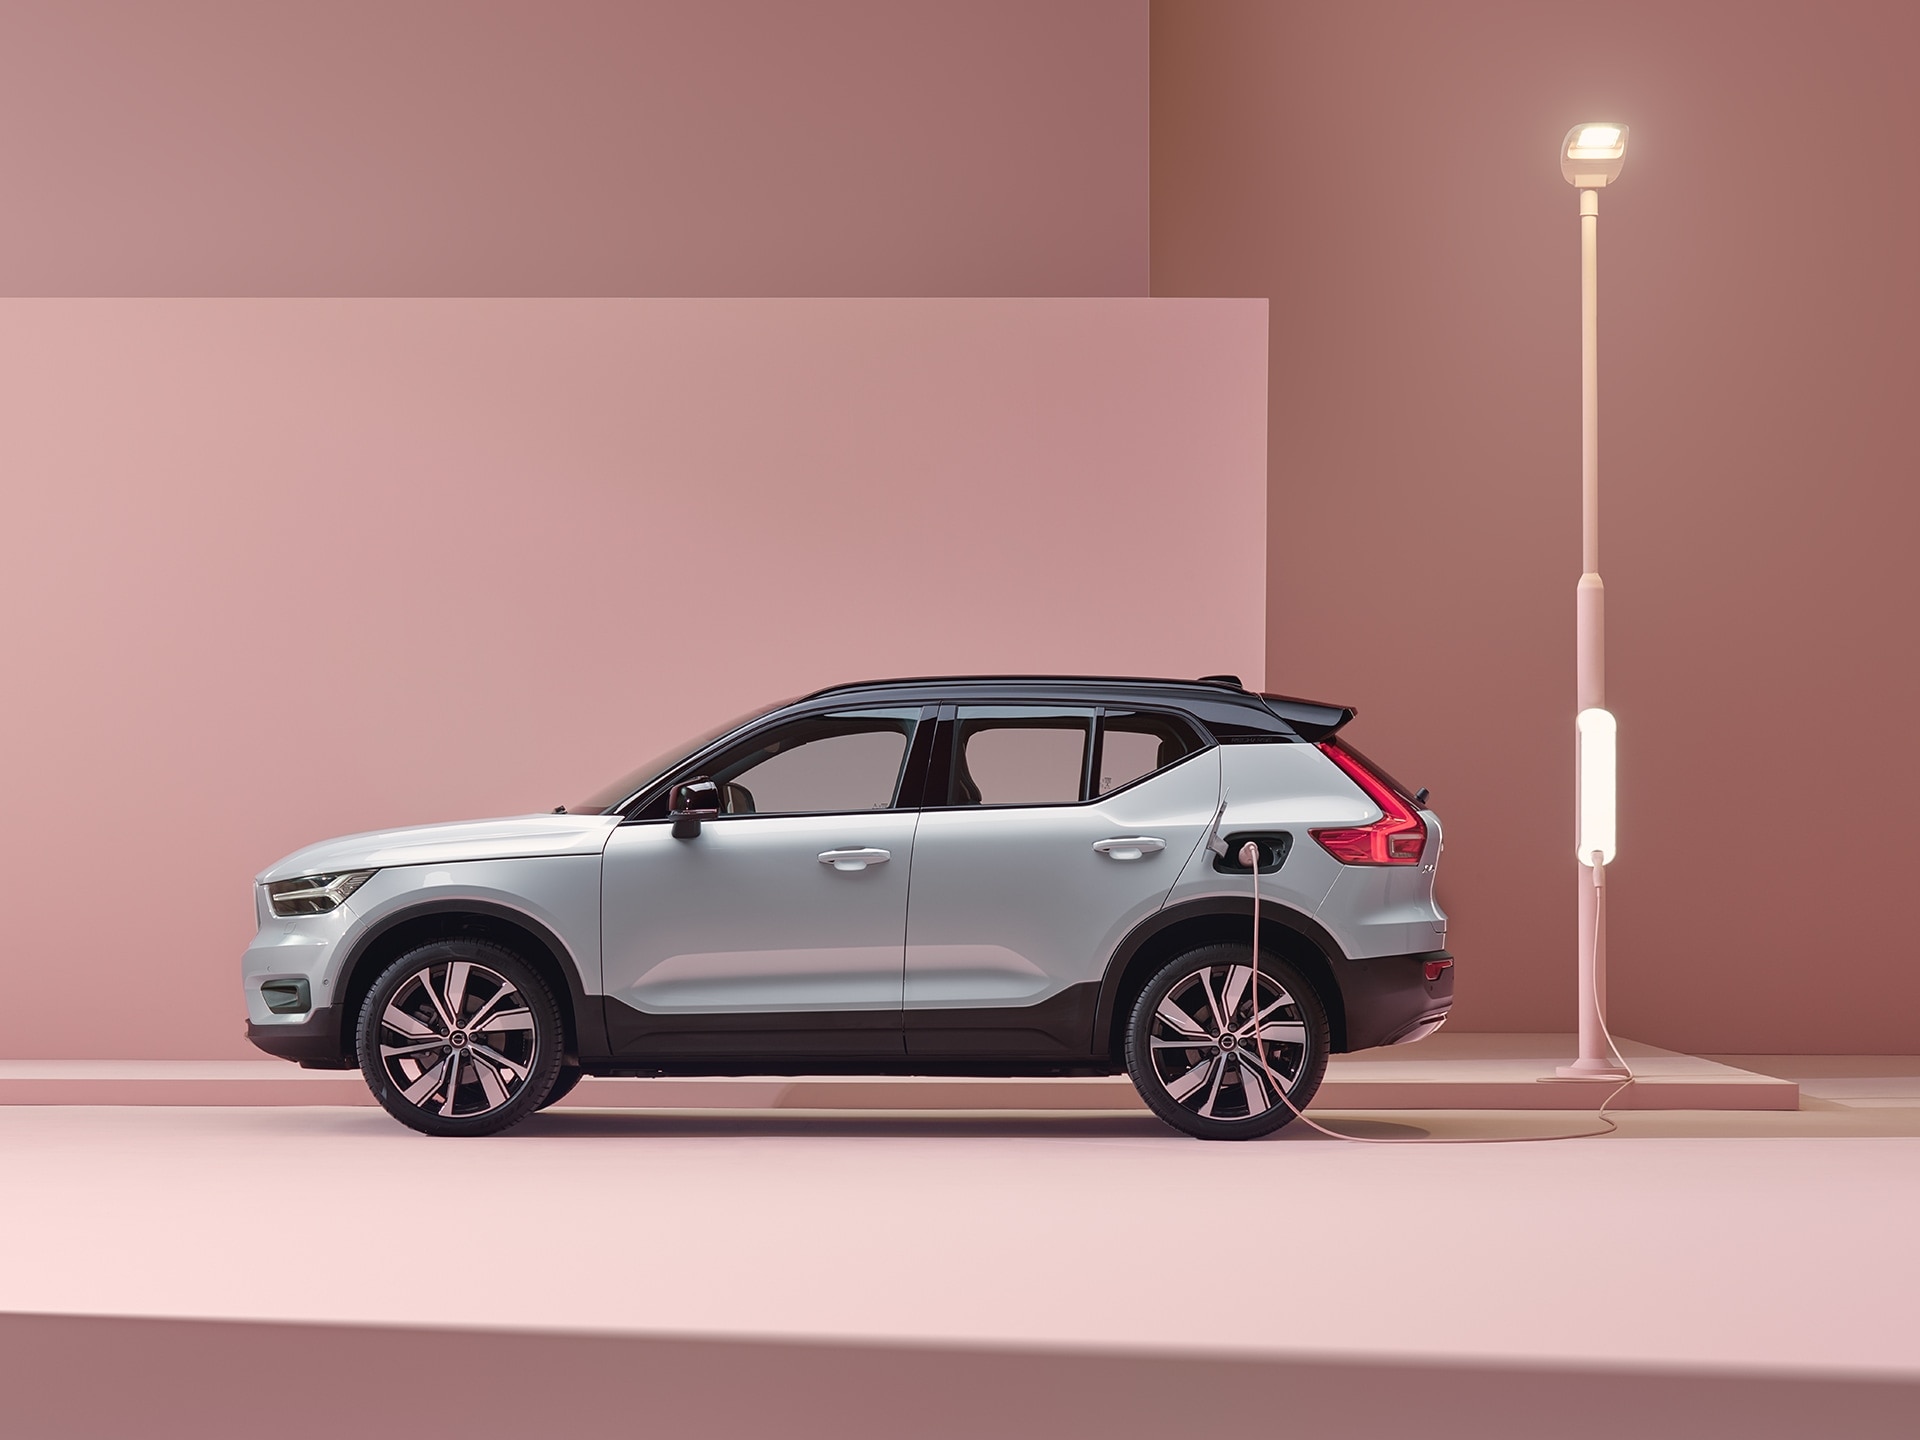 The side profile of a green Volvo XC40 Recharge pure electric SUV.